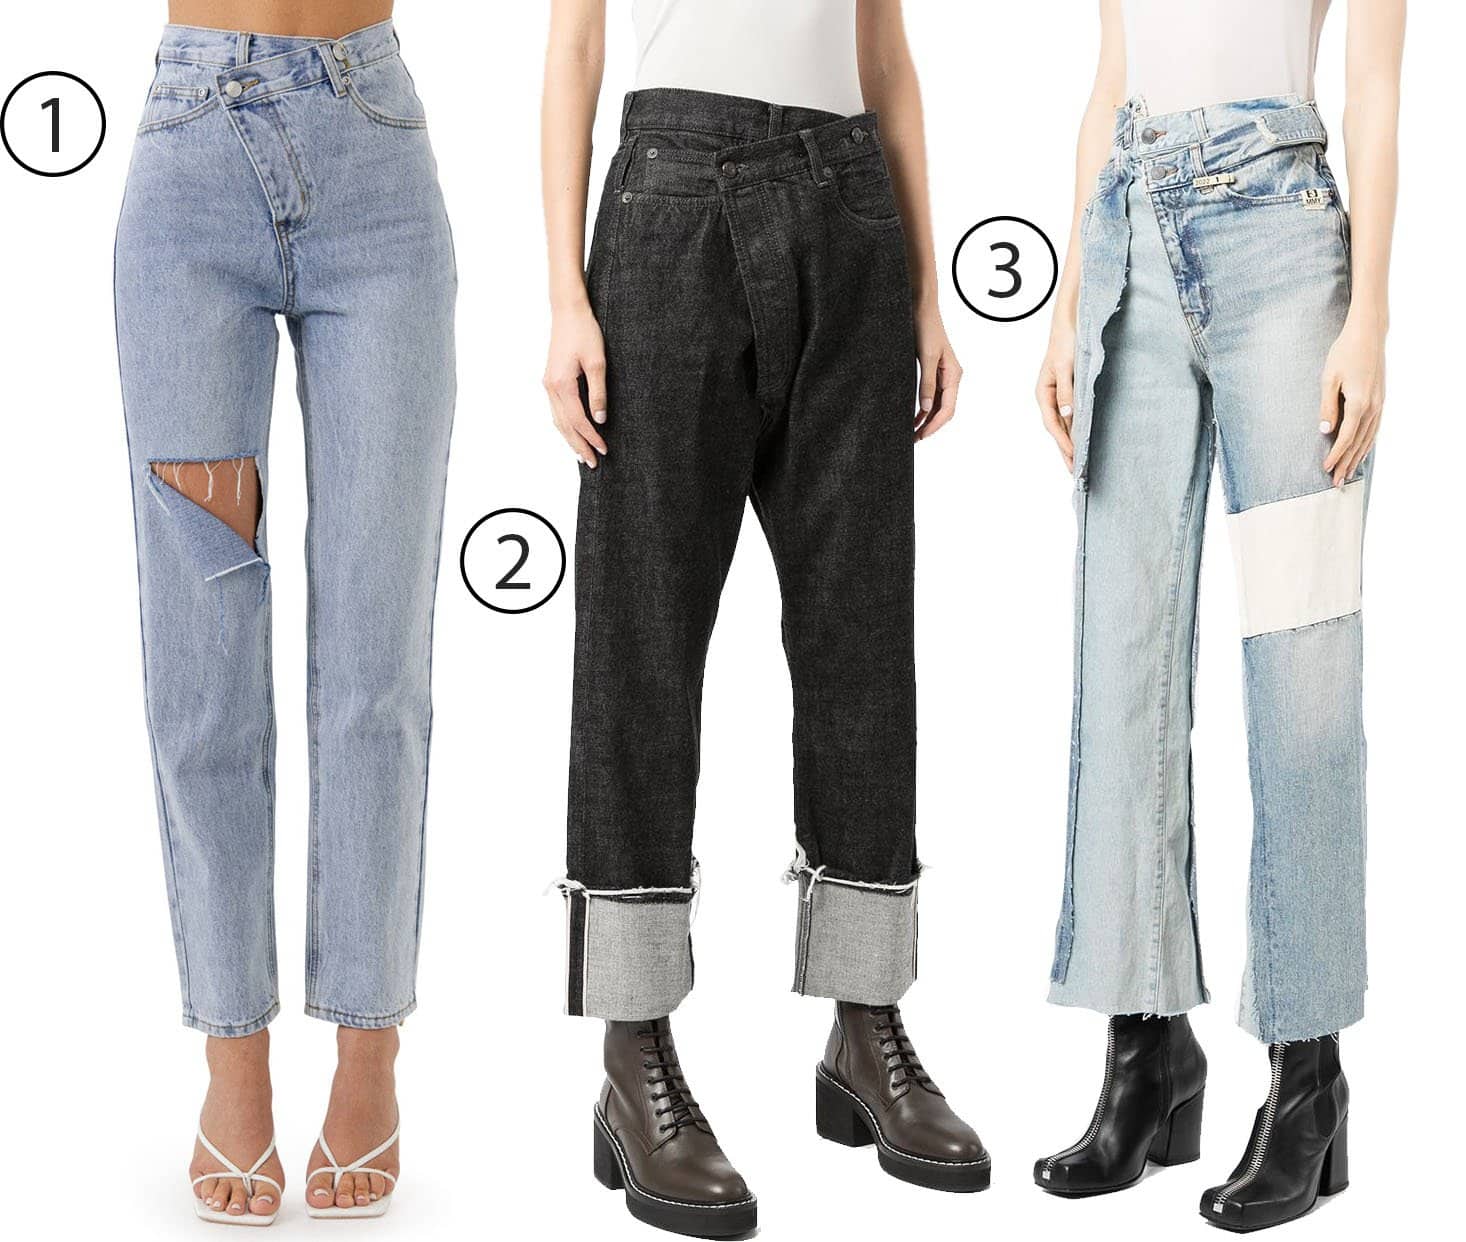 Make a bold statement with Grey Lab asymmetric wrap jeans, R13 asymmetric cropped jeans, and Maison Mihara Yasuhiro asymmetric patchwork-design jeans